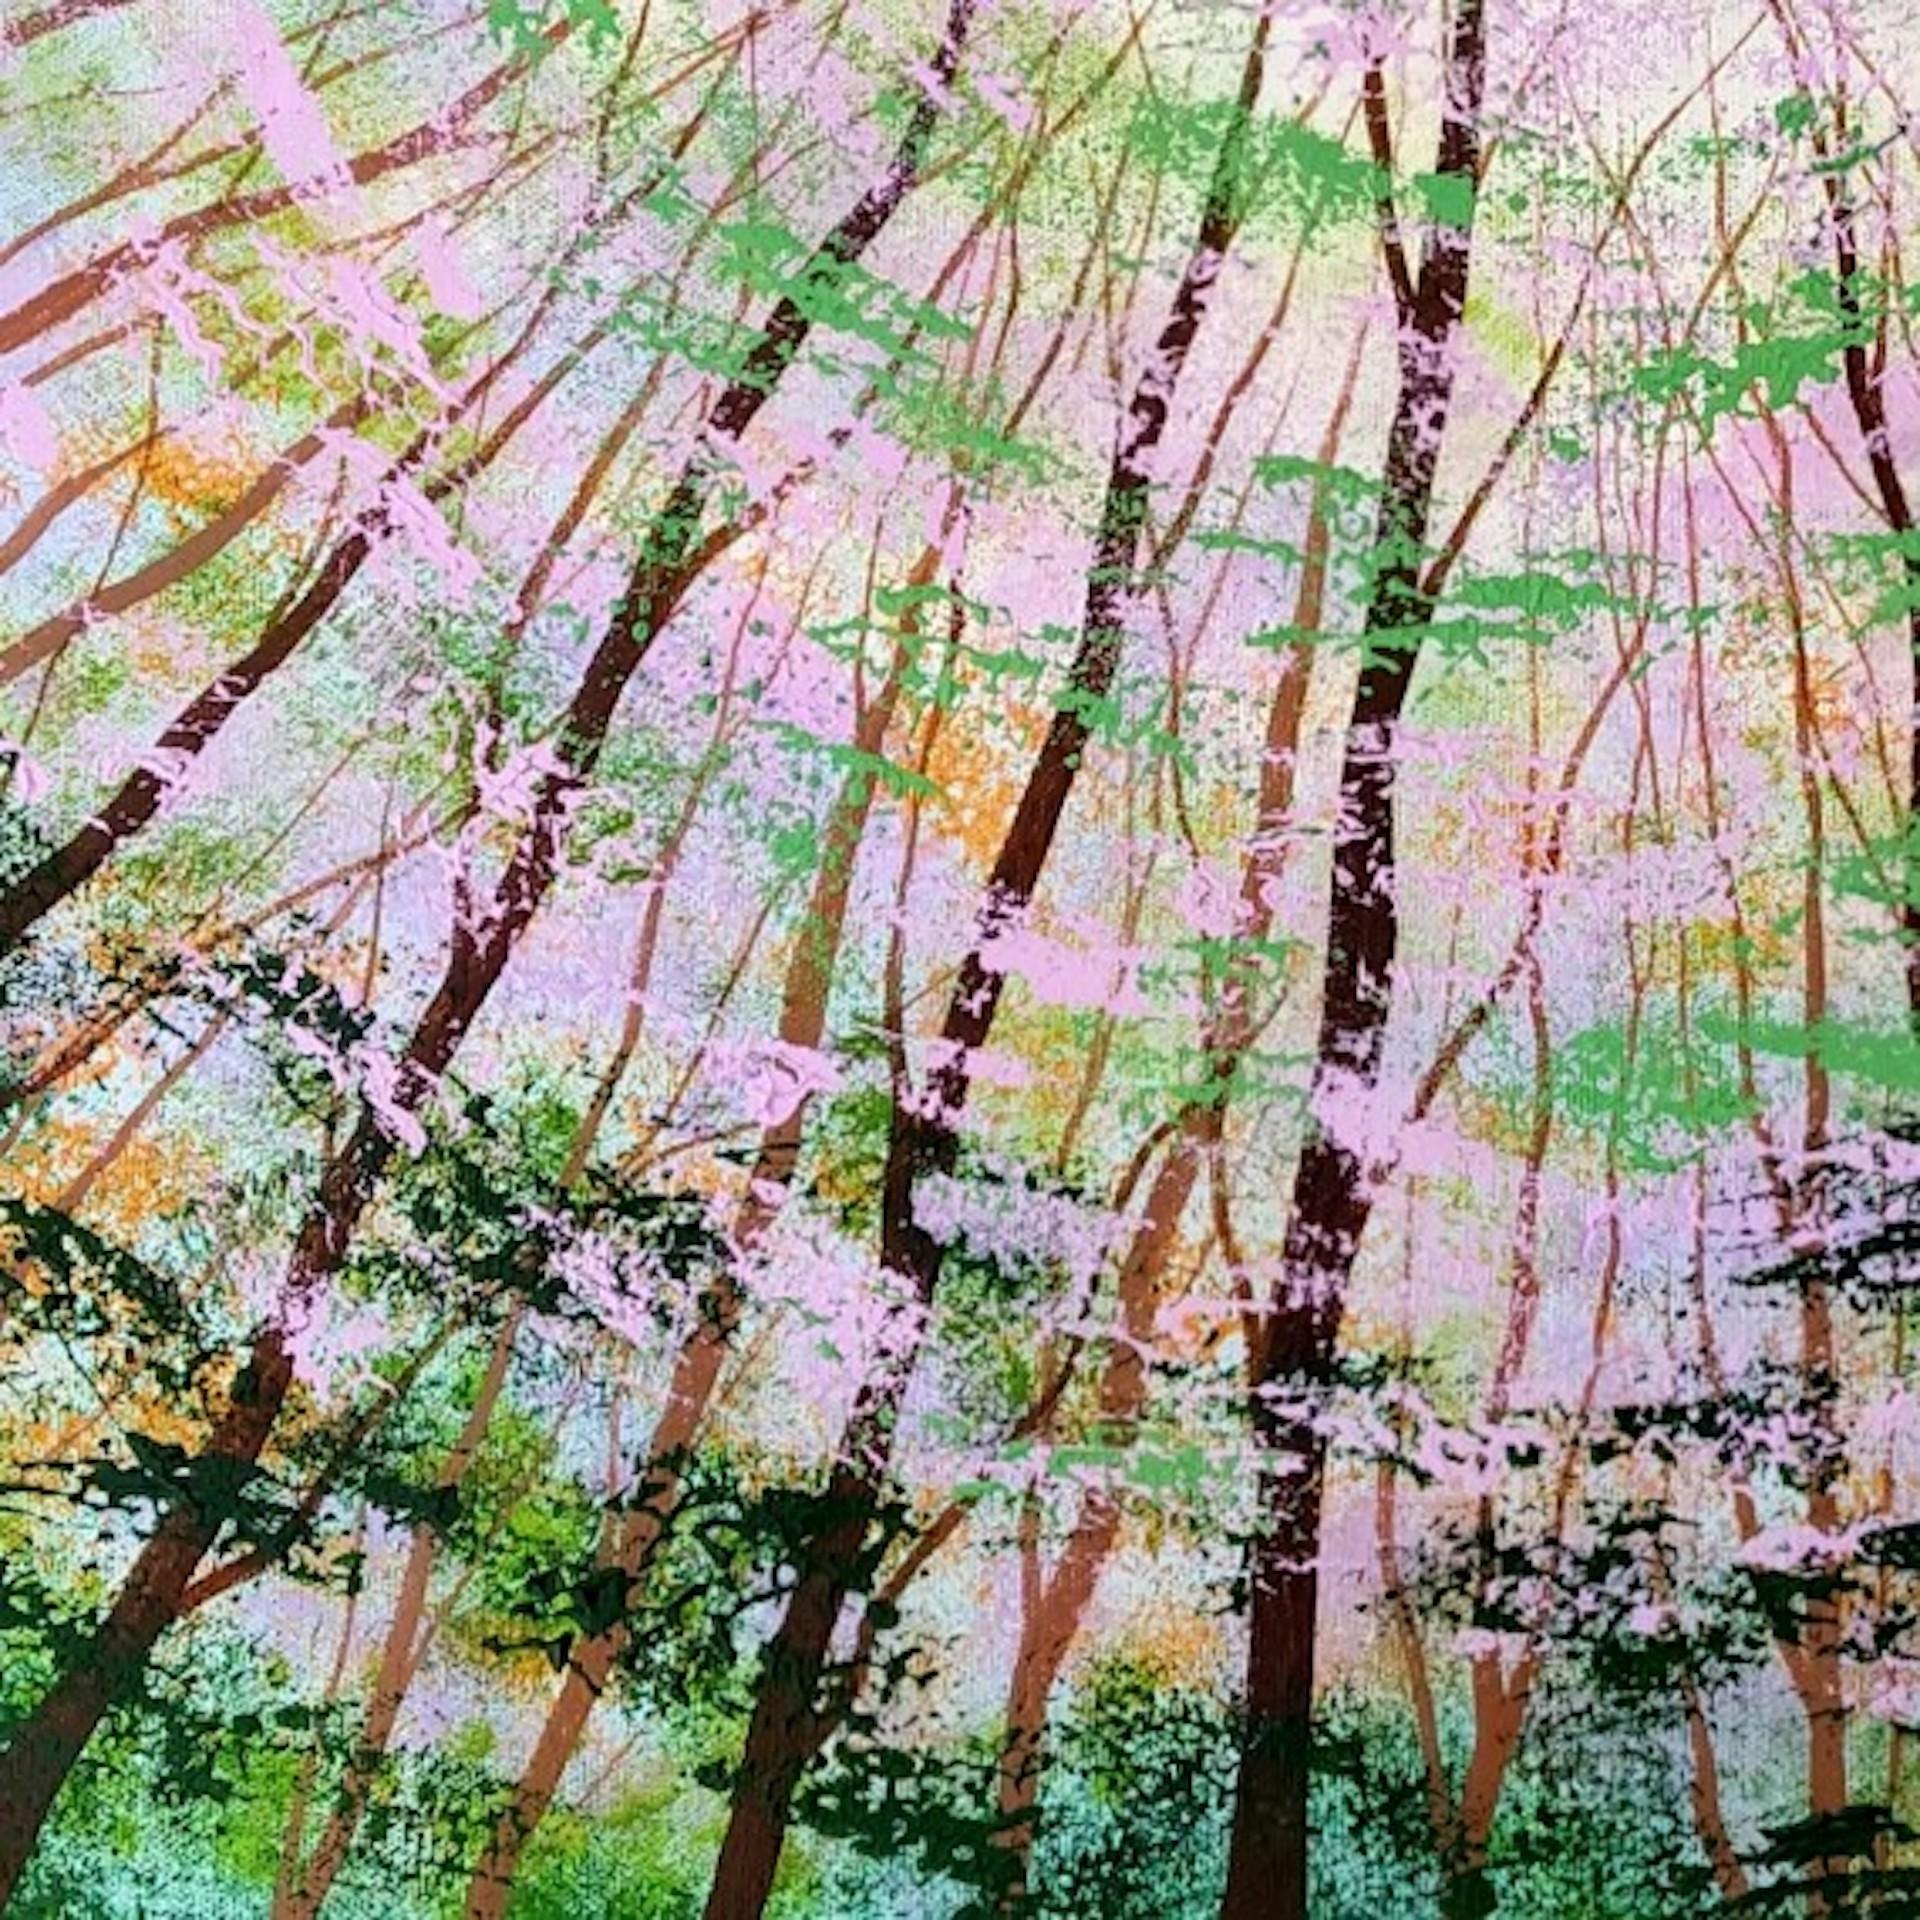 Forest Sky Light [2021]
Original
Landscape
Acrylics on canvas
Complete Size of Unframed Work: H:70 cm x W:70 cm x D:3.5cm
Sold Unframed
Please note that insitu images are purely an indication of how a piece may look

